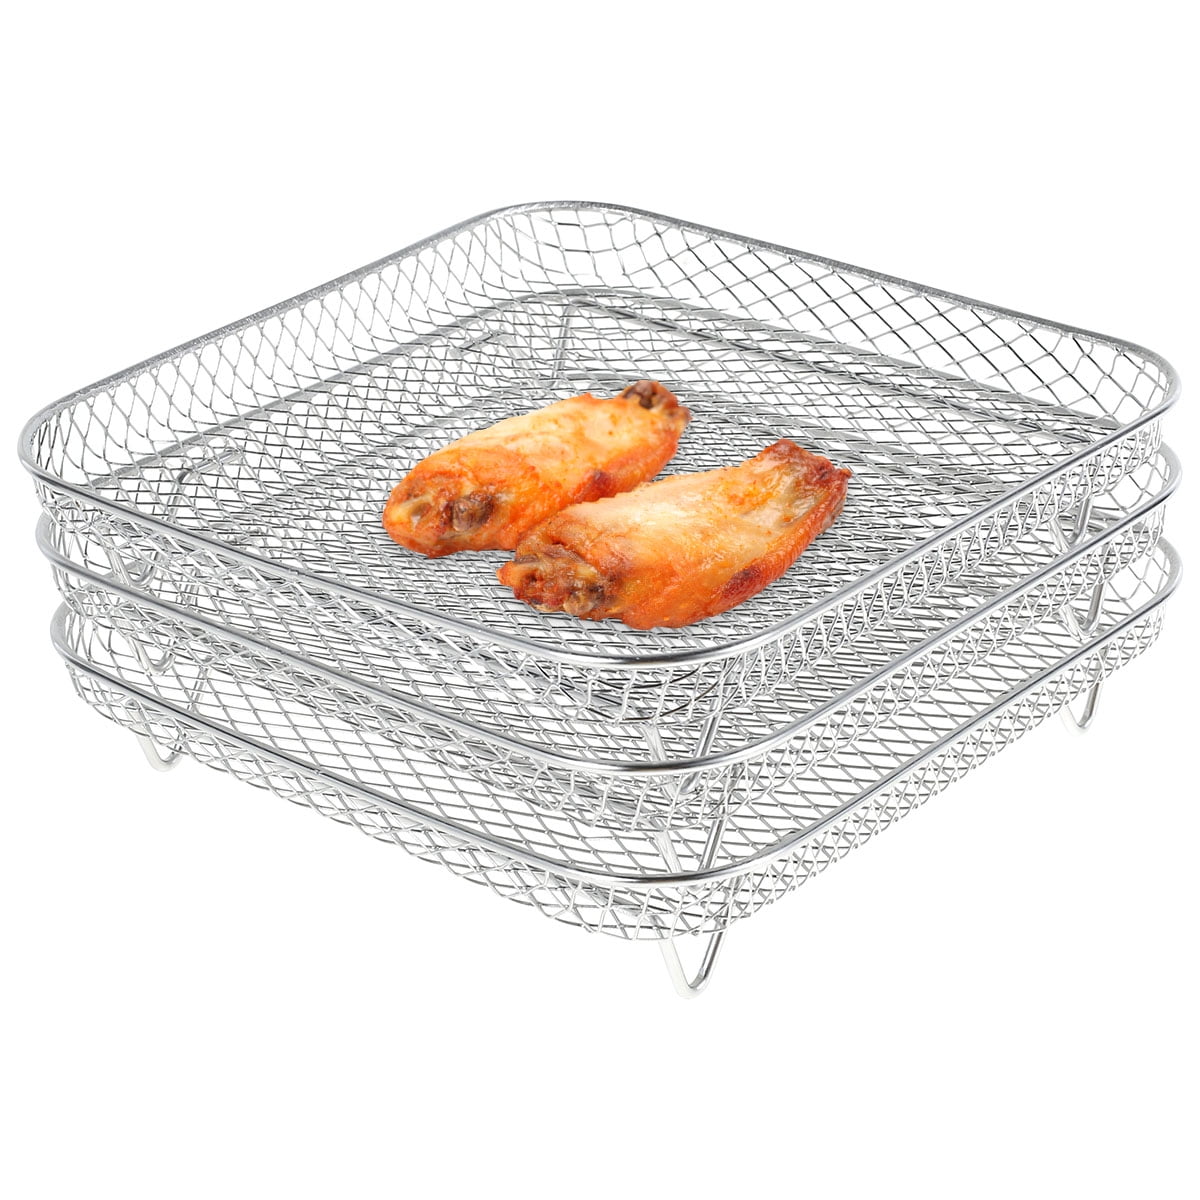 Gemdeck Air Fryer Basket For Oven, Stainless Steel 1/4 Rimmed Baking Sheet  With Wire Rack 